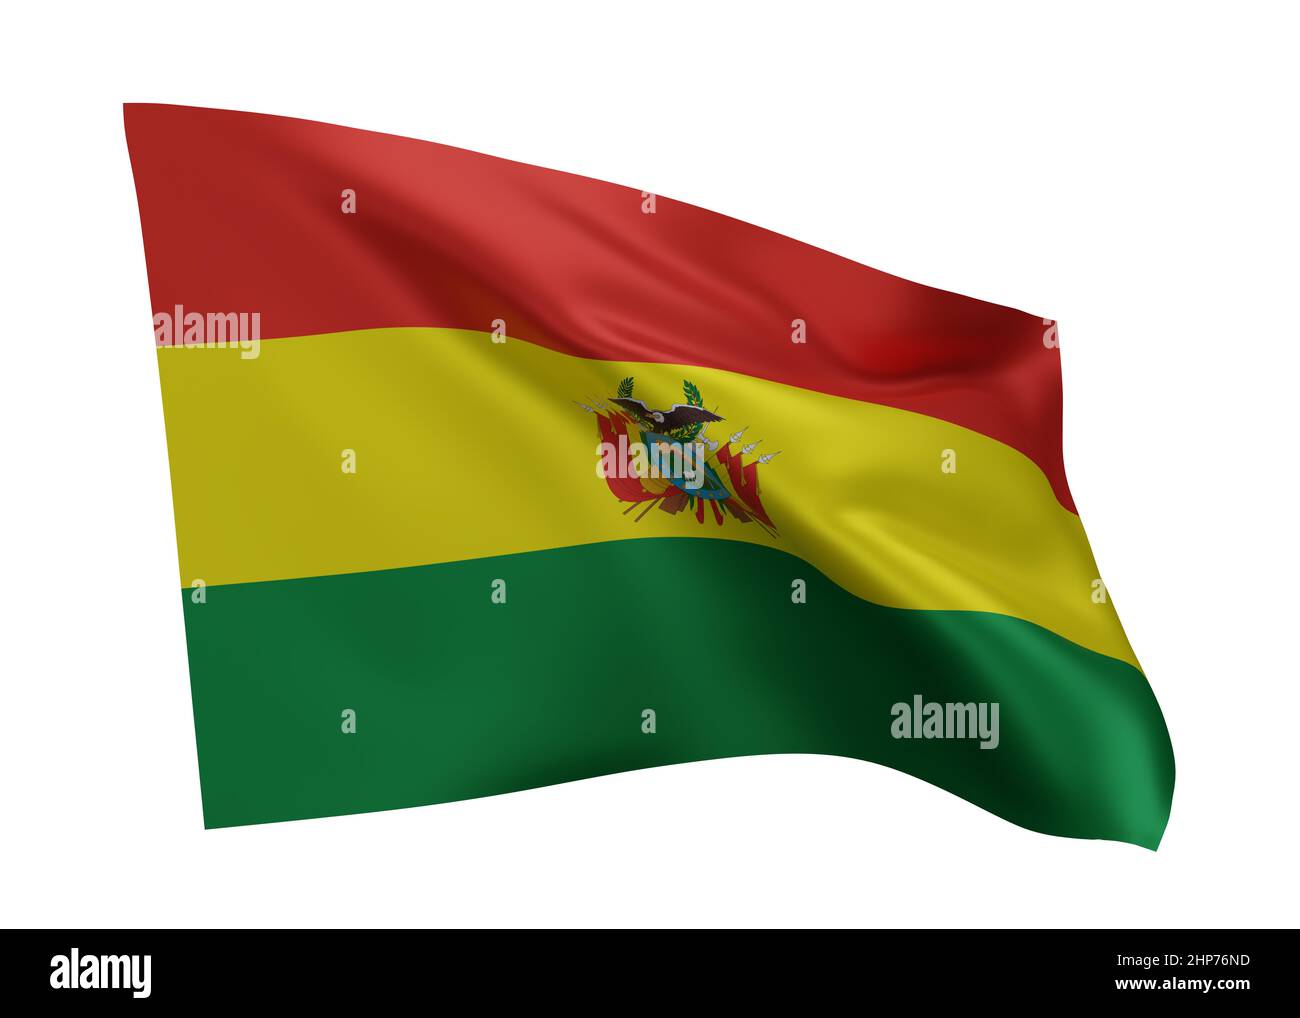 3d illustration flag of Bolivia. Bolivian high resolution flag isolated against white background. 3d rendering Stock Photo